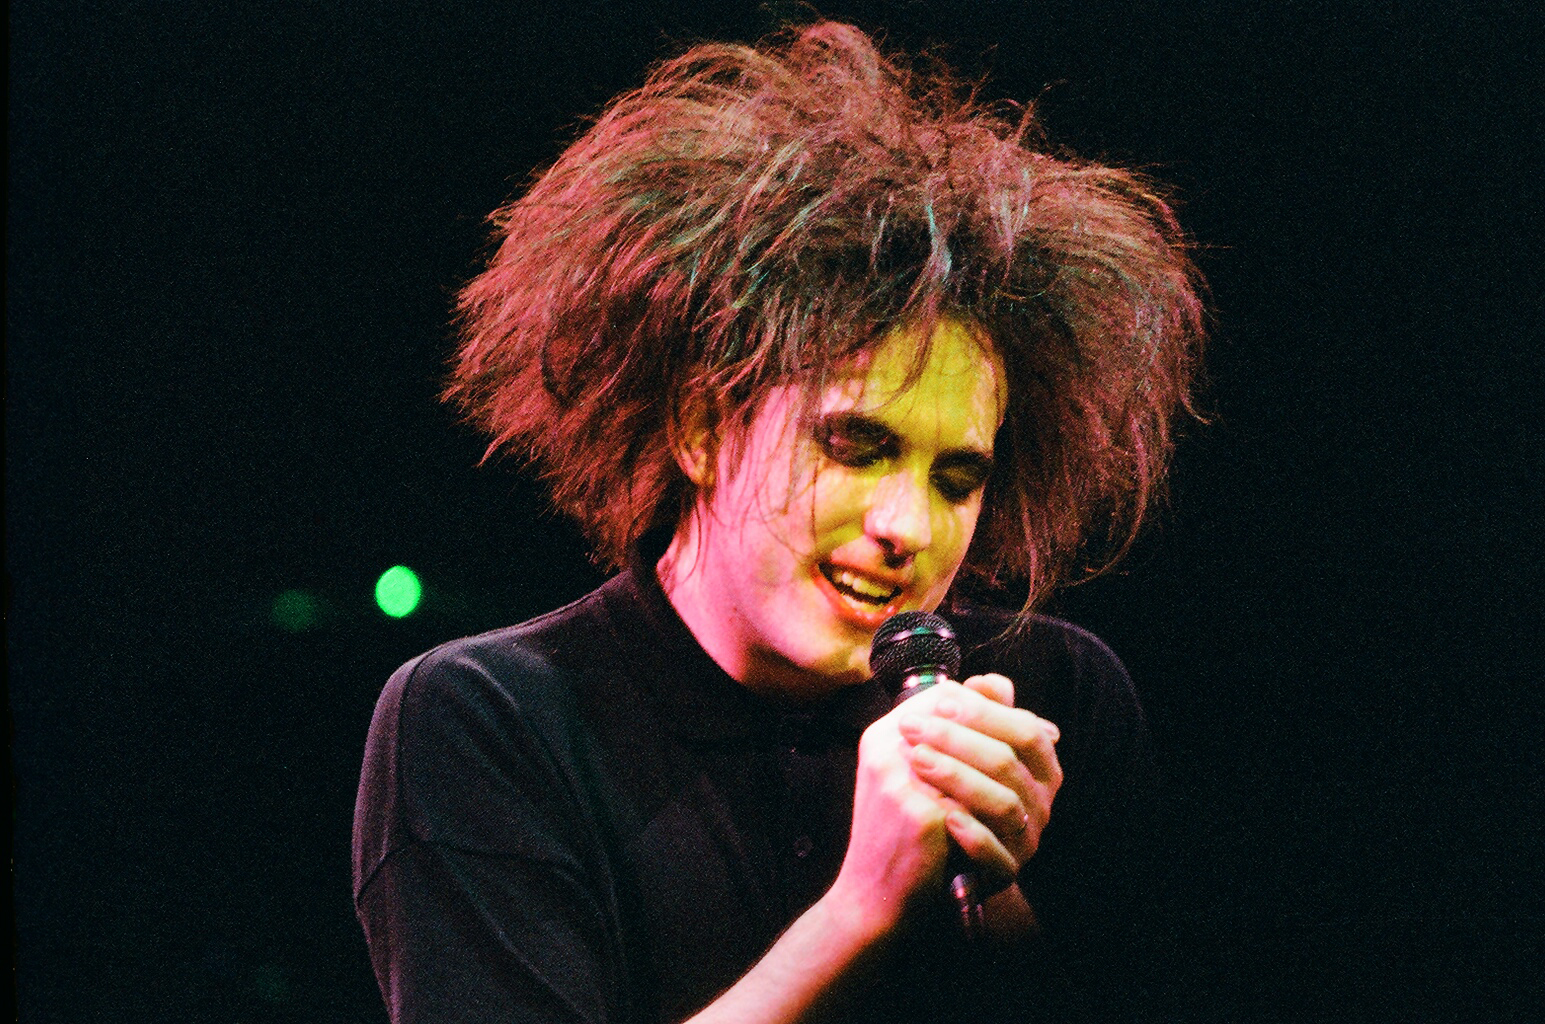 Robert Smith of The Cure performs on stage at The Royal Albert Hall, on April 25th, 1986, in London, United Kingdom. | Source: Getty Images